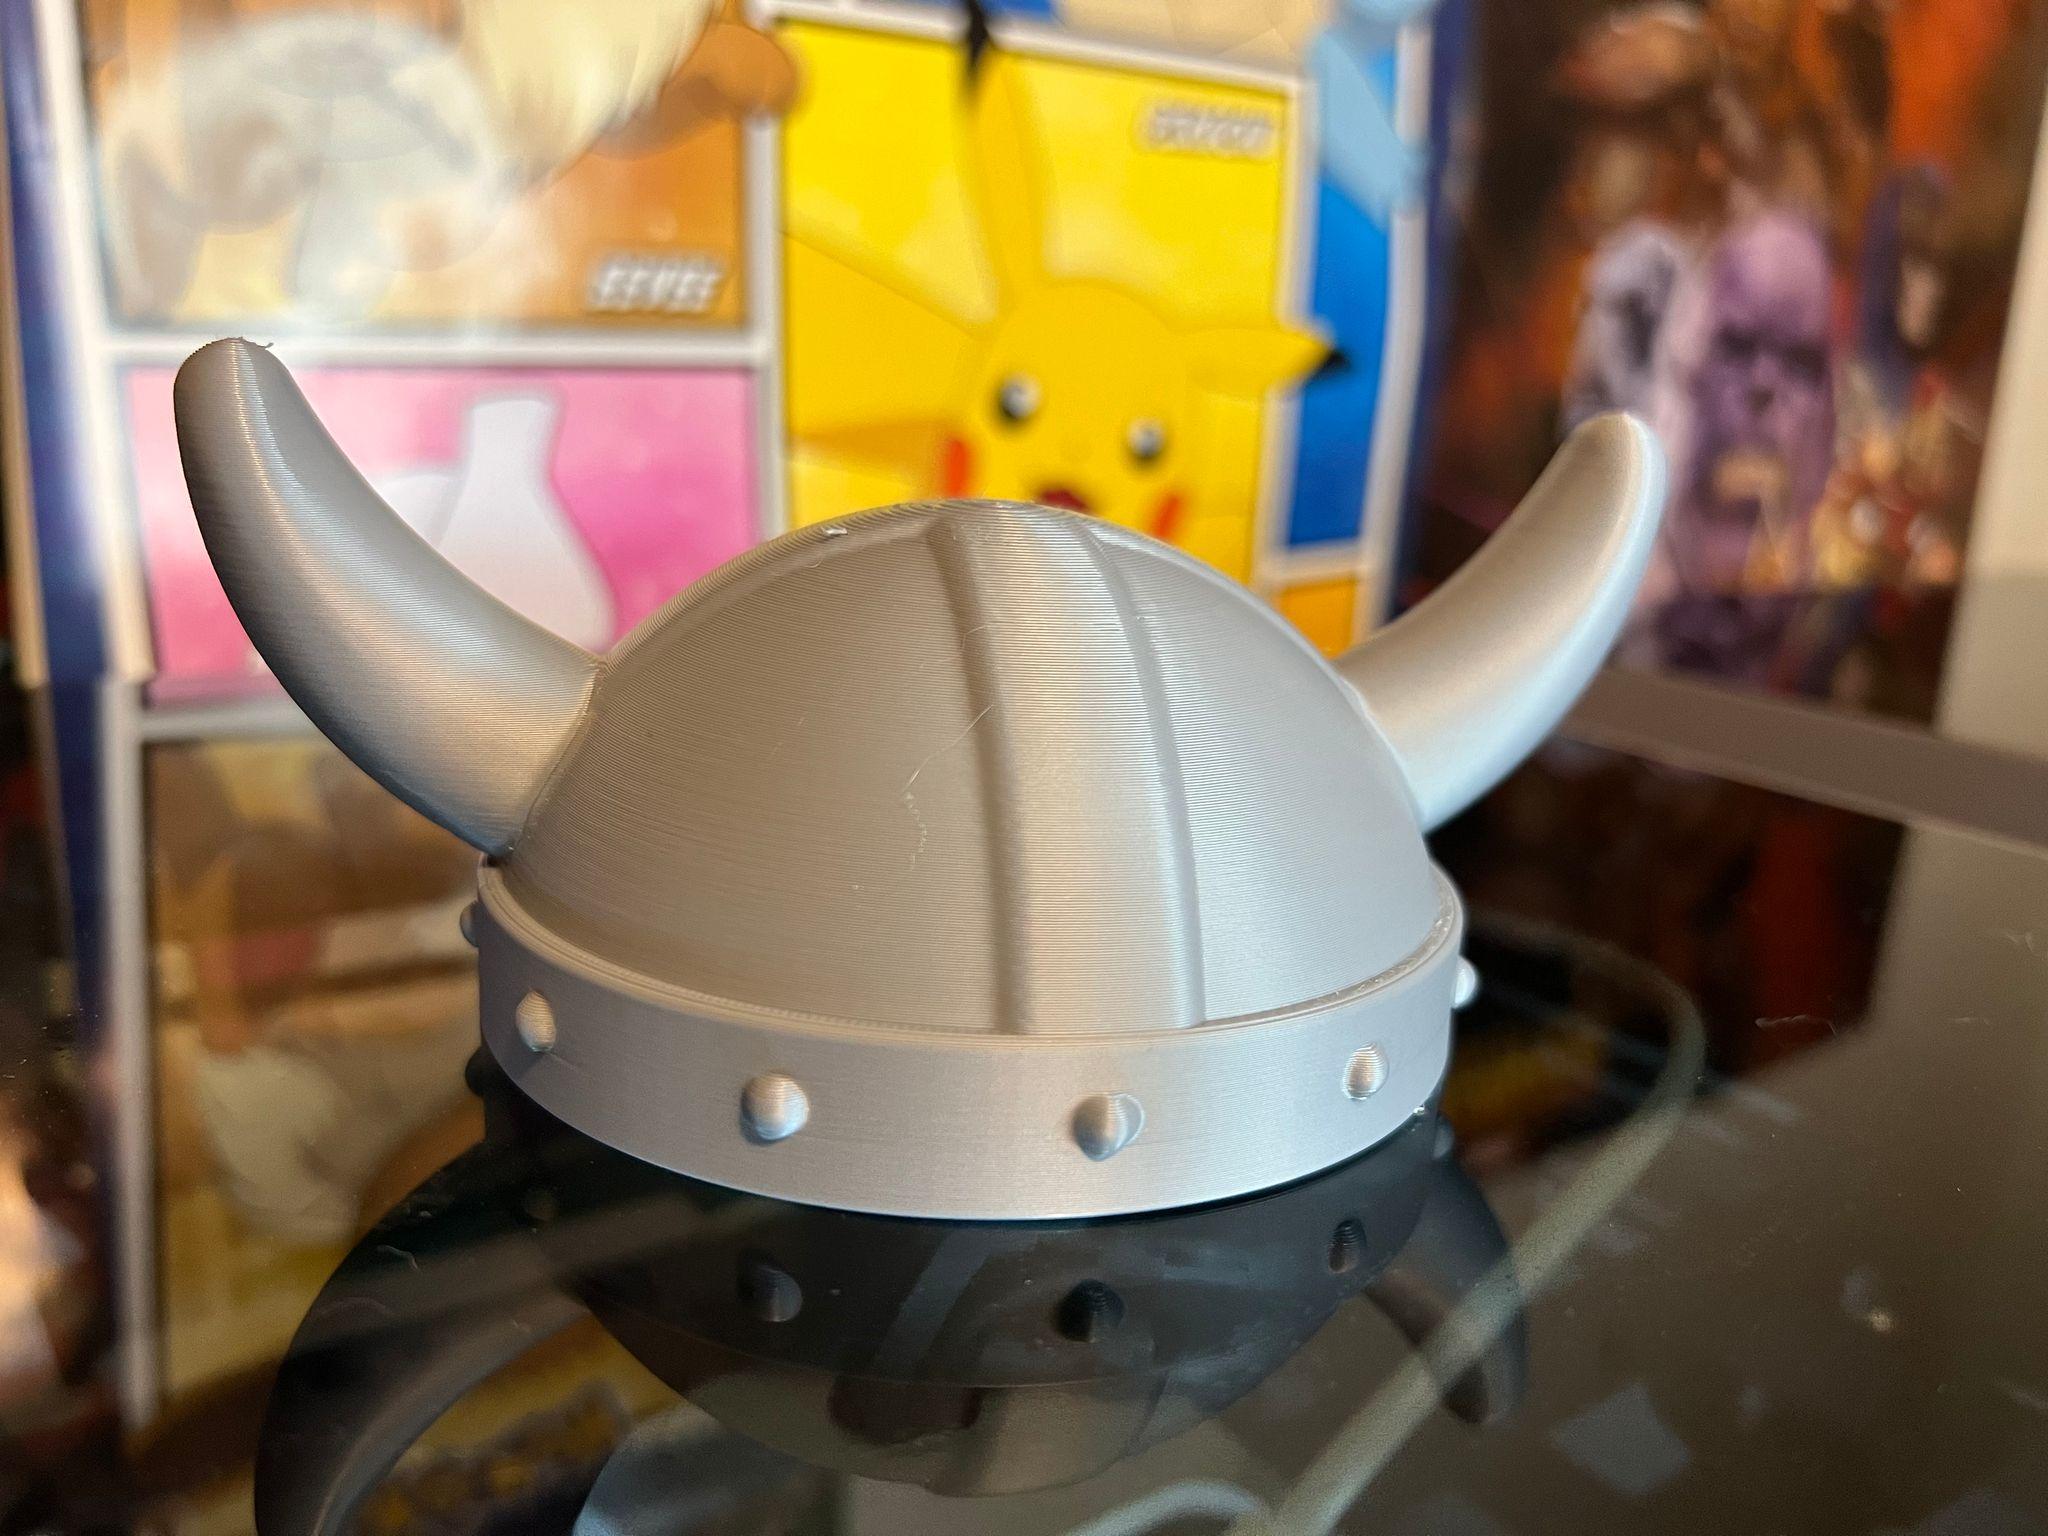 Wearable viking helm 2 - Print in place - Halloween costume 3d model